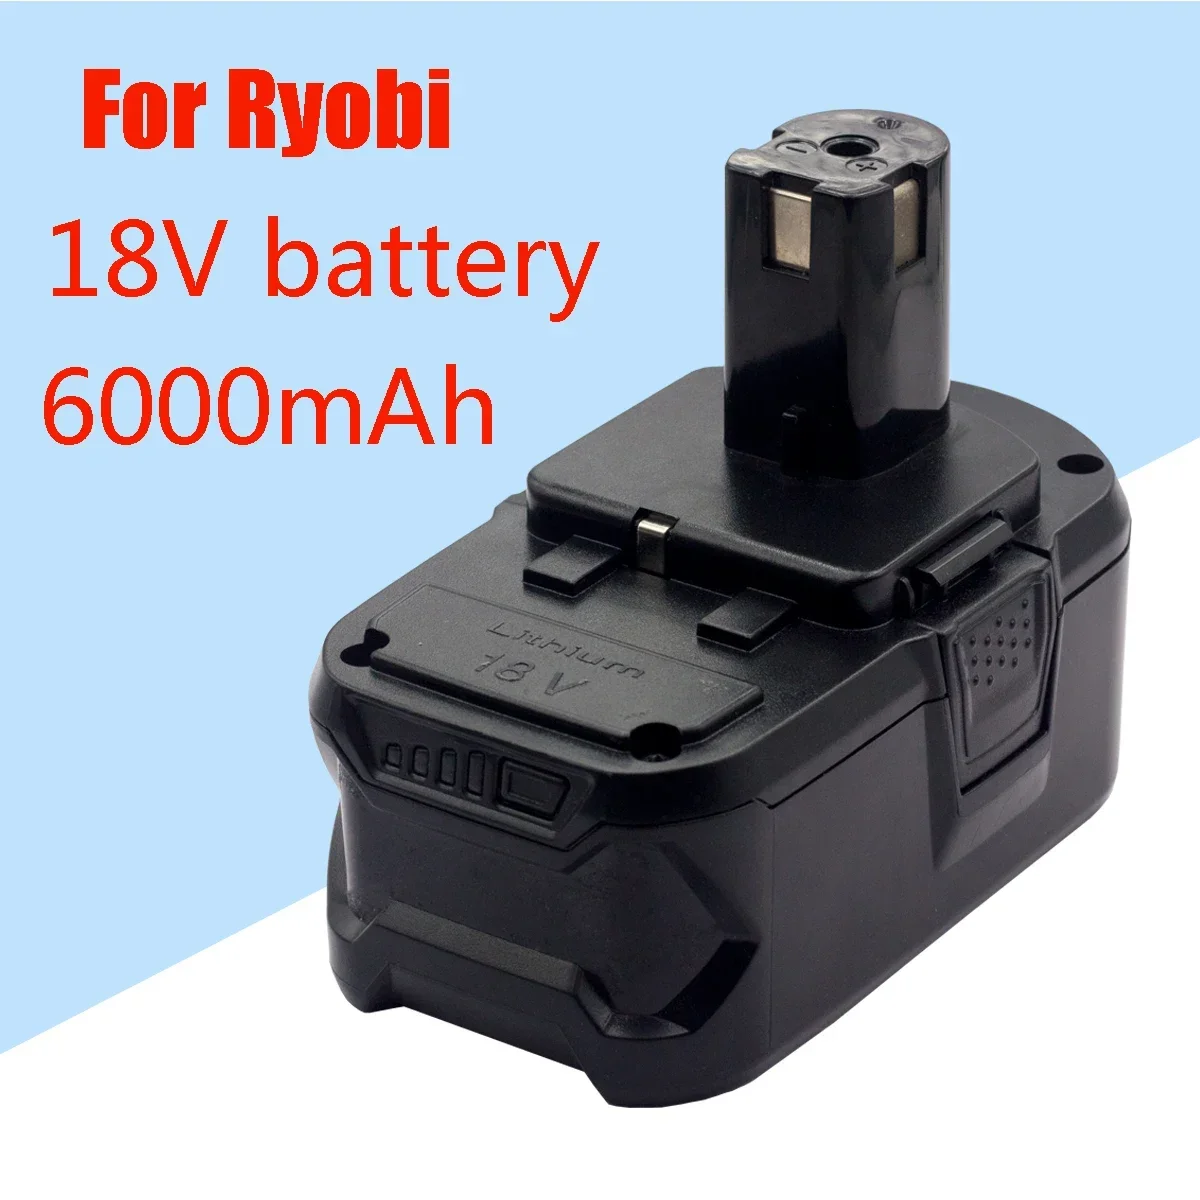 

Replace Ryobi ONE18V Wireless Power Tool BPL1820 P108 P109 P106 RB18L50 RB18L40 Lithium Ion Battery 6000mAh